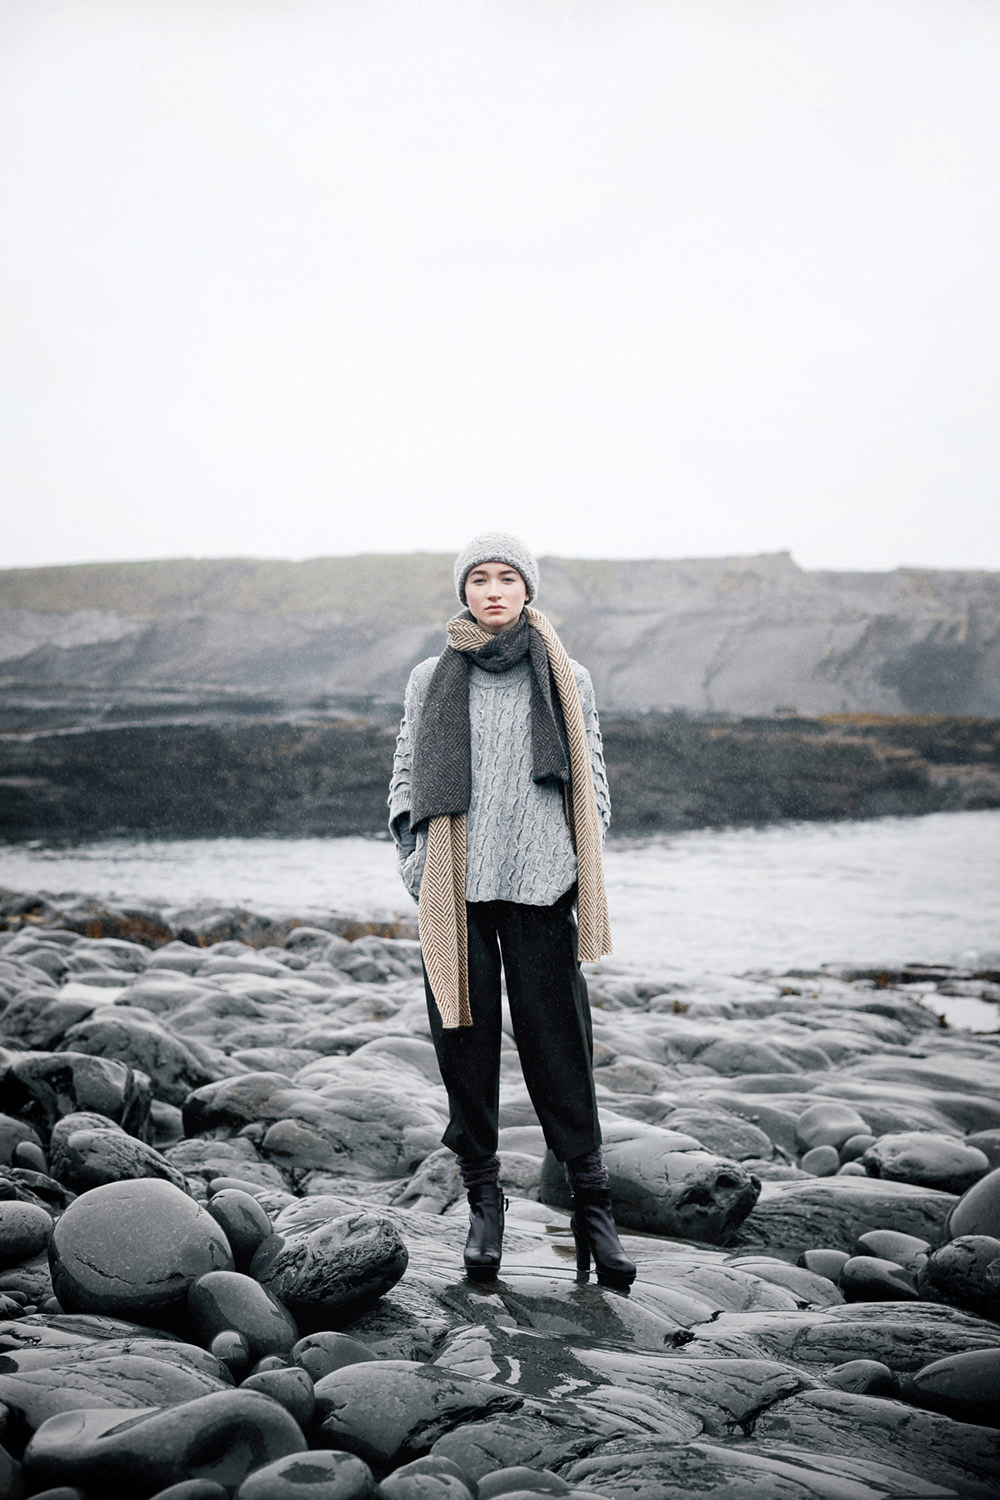 Aine McConnells Knitwear in the West of Ireland shot by Johnny McMillan 1.jpg